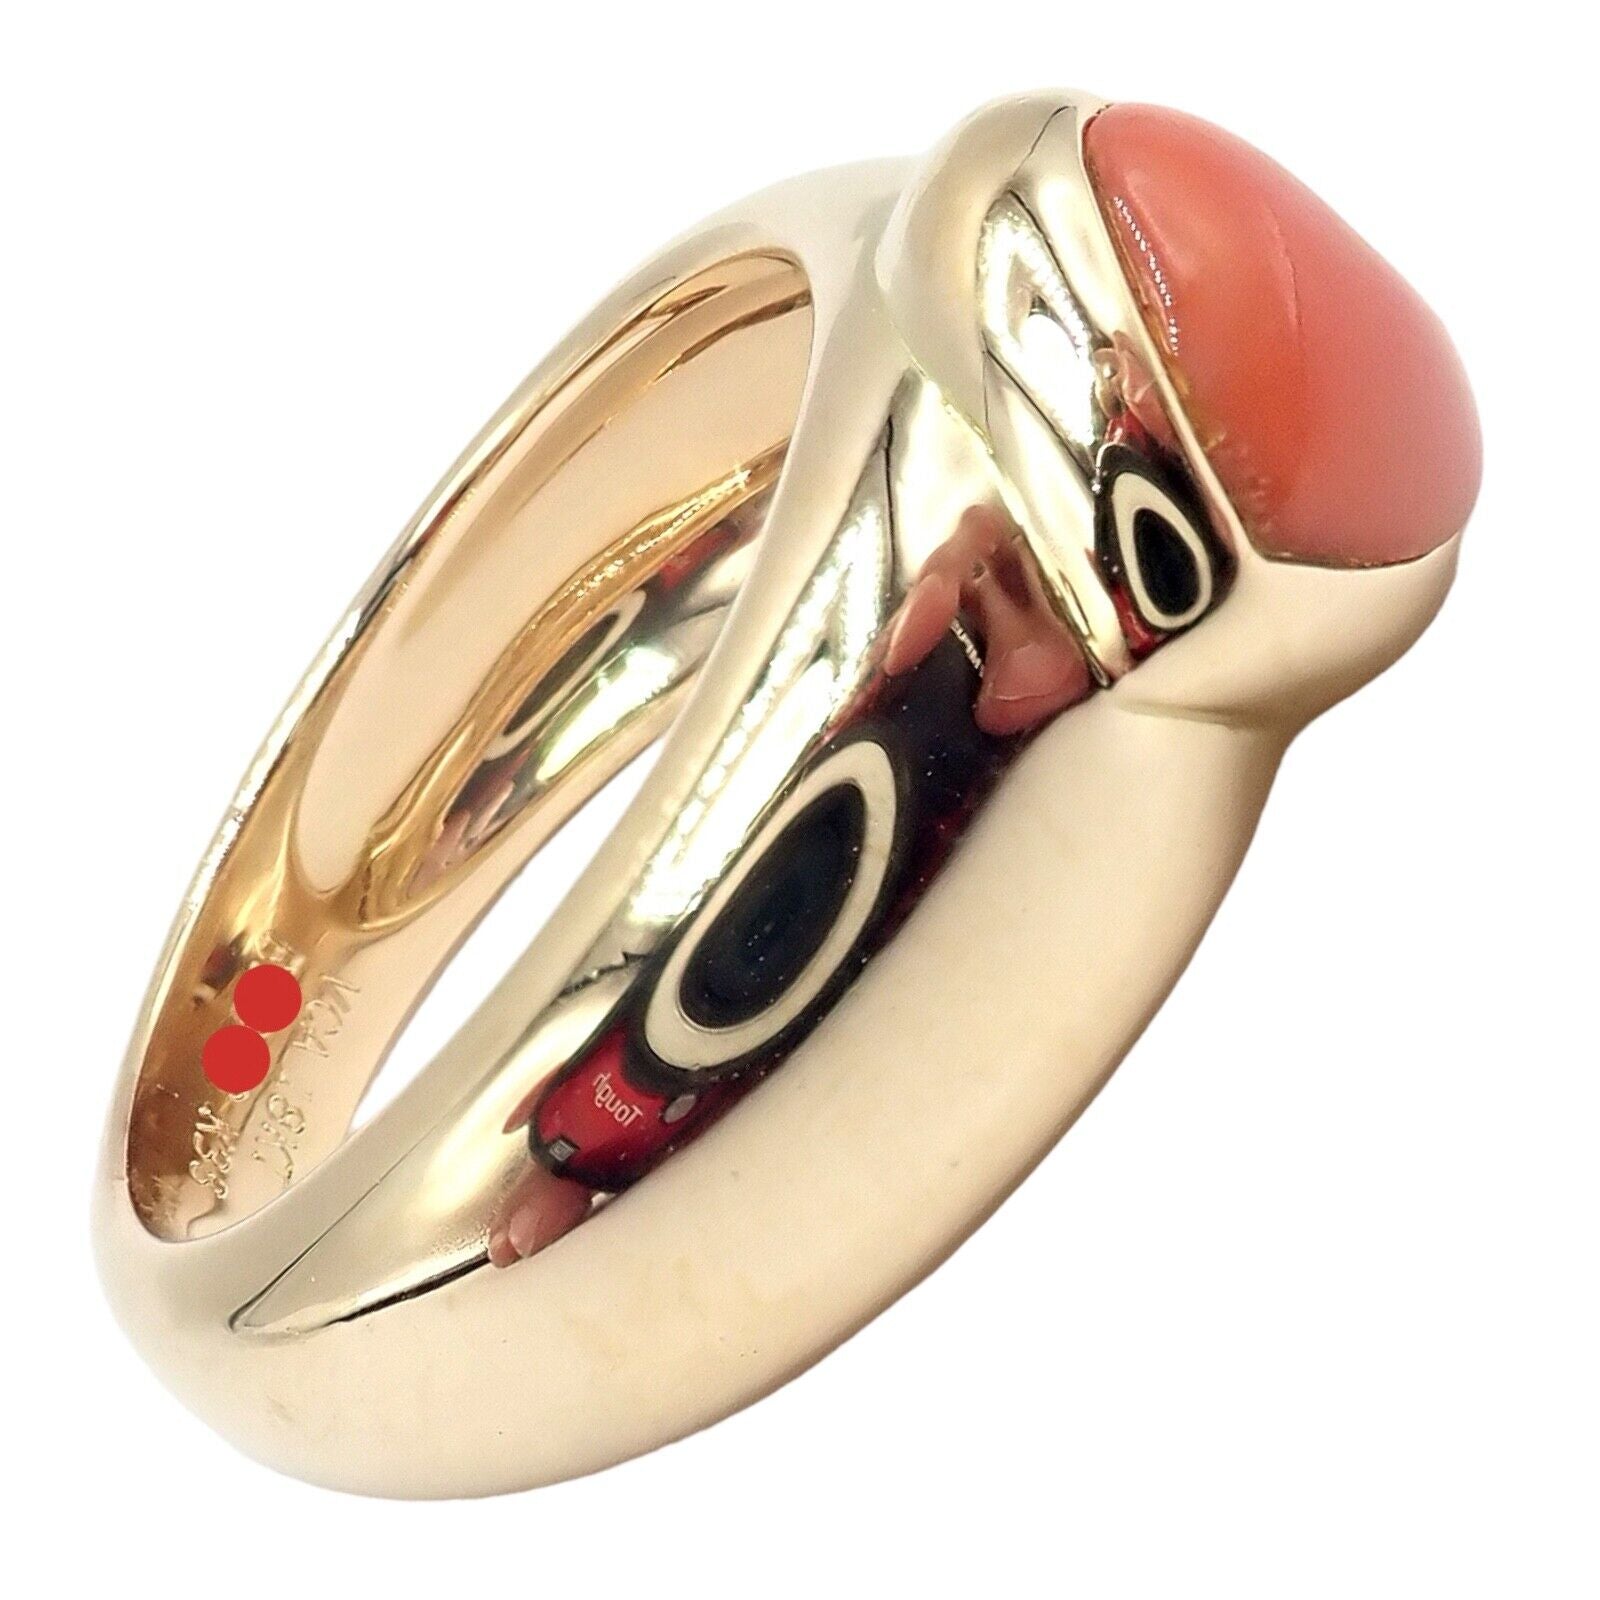 Van Cleef & Arpels Jewelry & Watches:Fine Jewelry:Rings Rare! Authentic Van Cleef & Arpels 18k Yellow Gold Coral Heart Ring sz 4.5